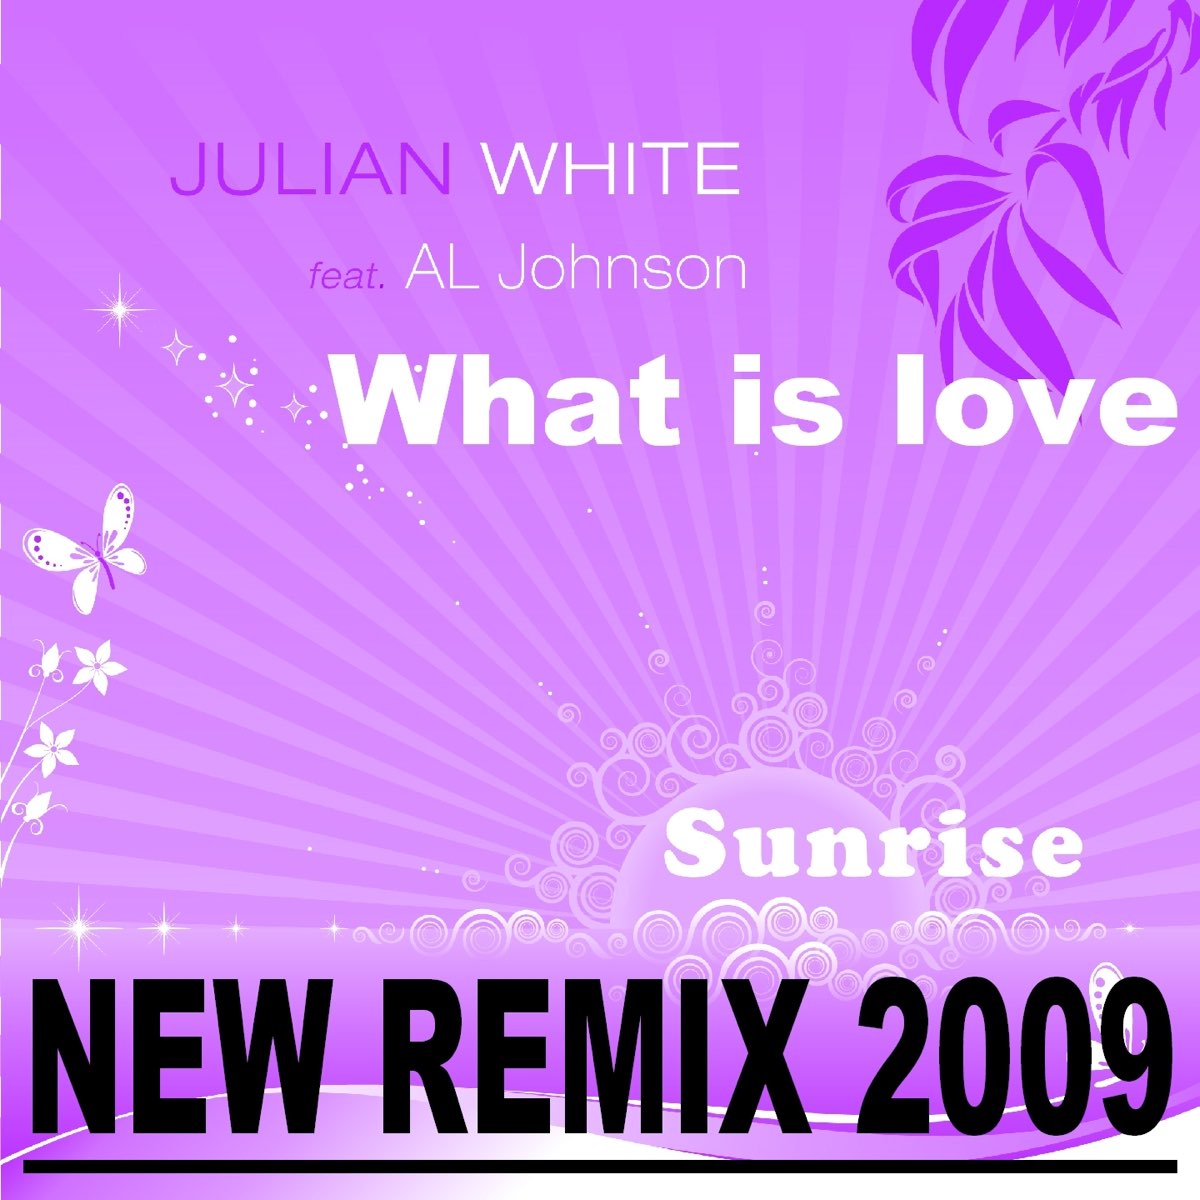 New remix. What is Love ремикс. Маша Рассказова what is Love. Julian White. What is Love слушать.